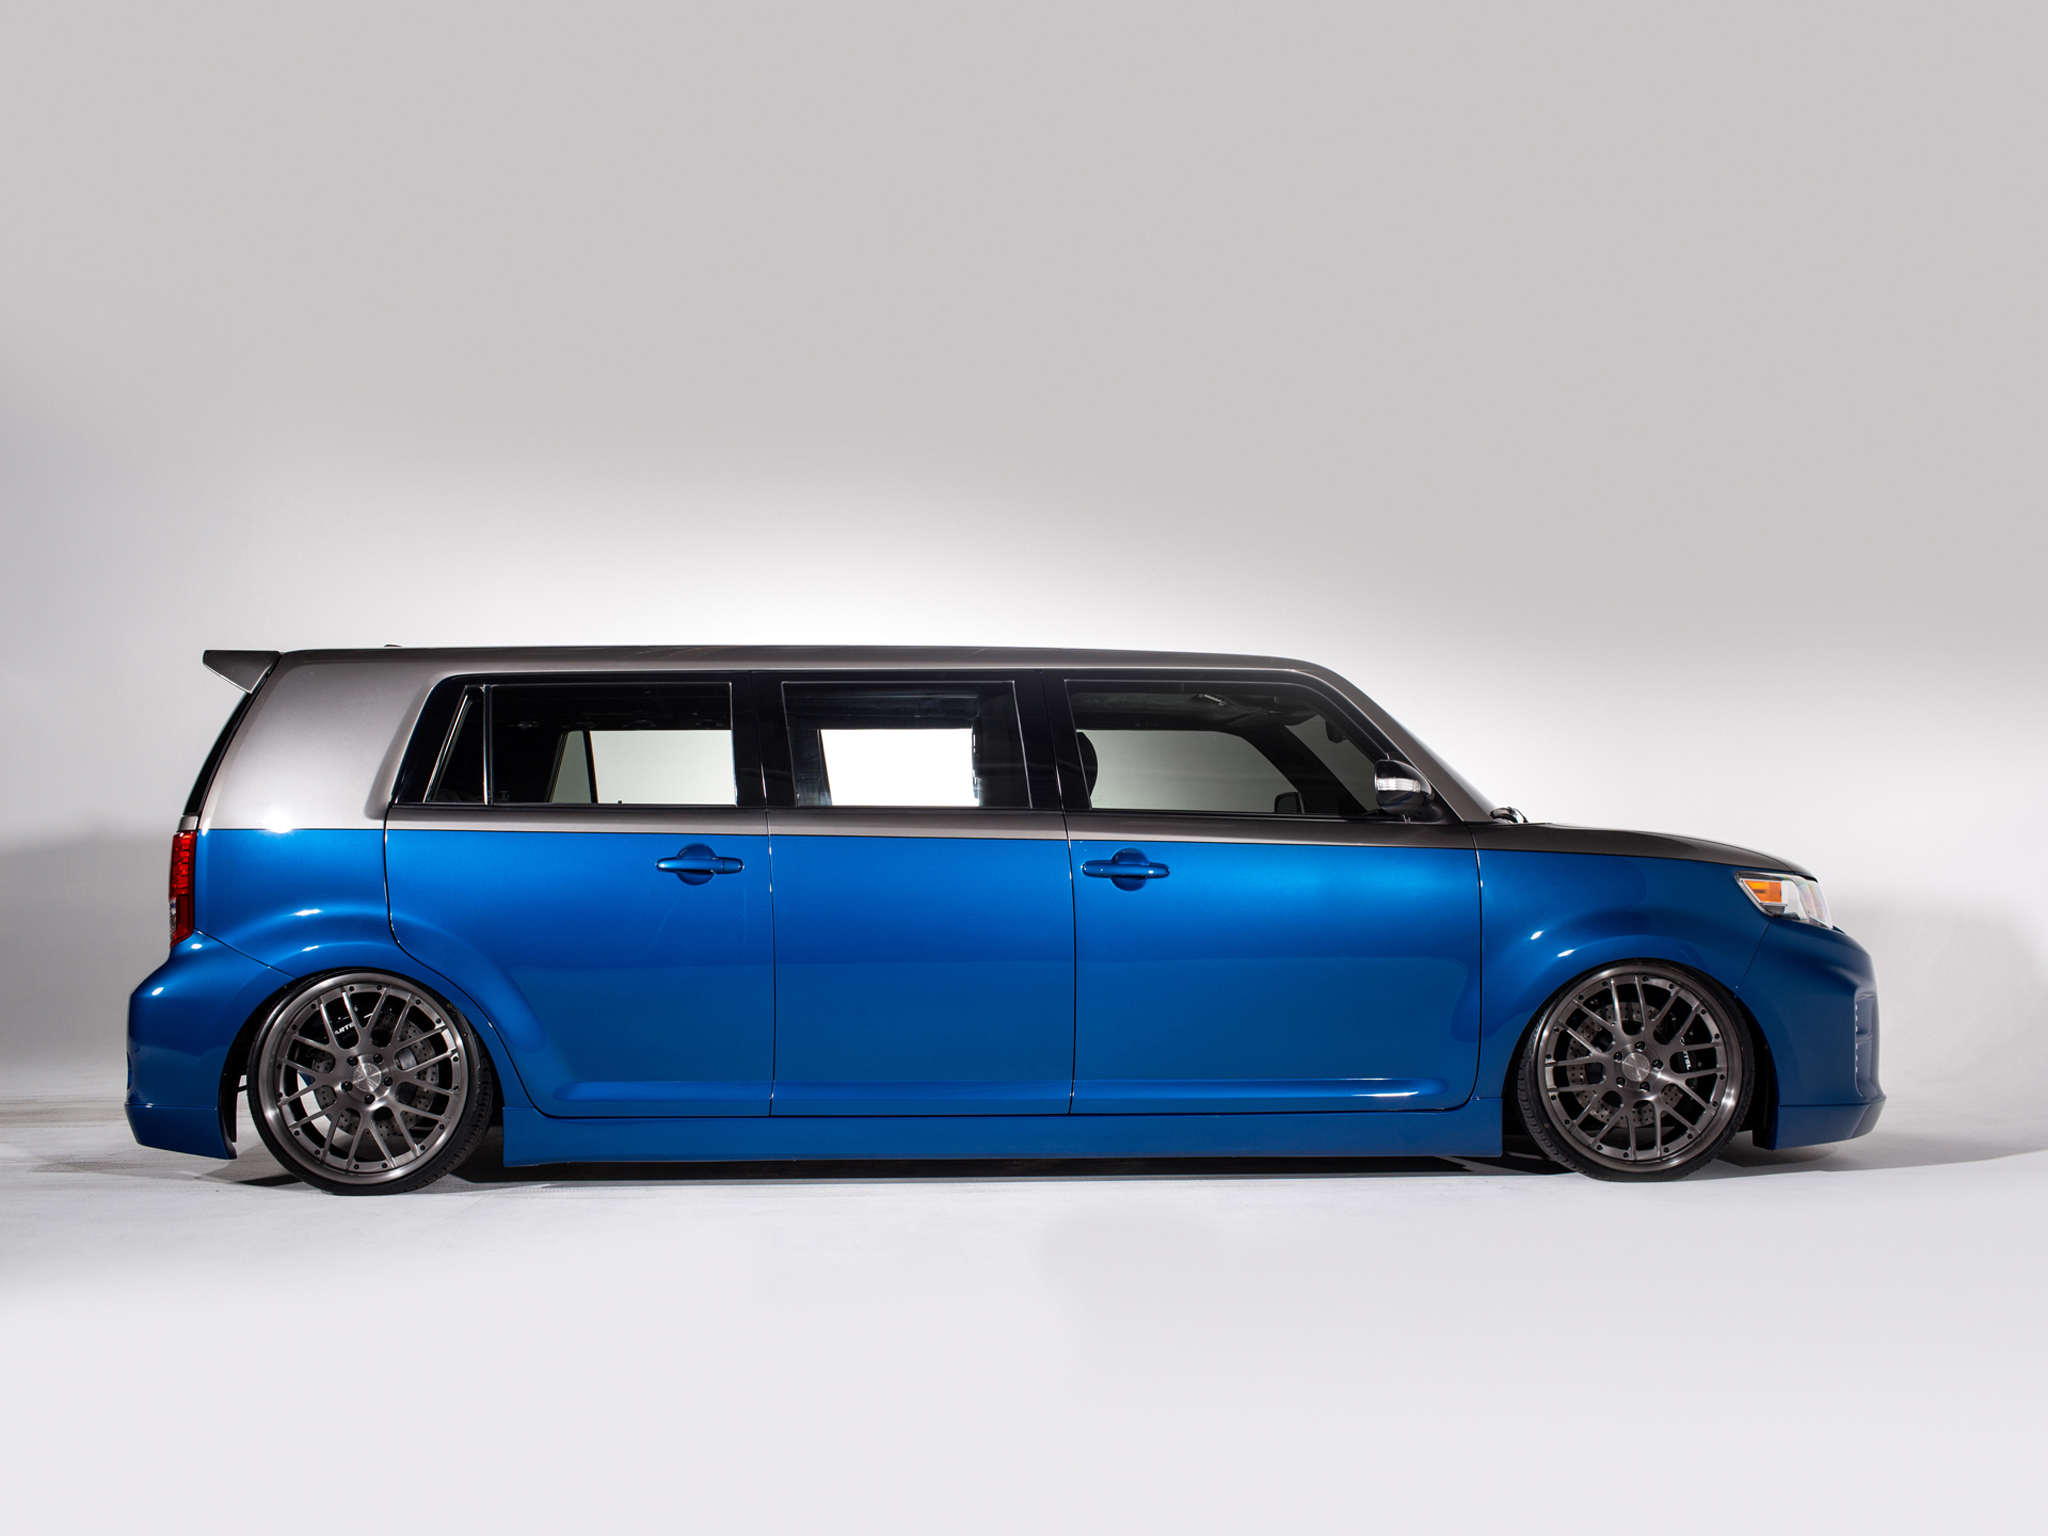 2014, Scion, Xb, Strictly, Business, Cartel, Limousine, Tuning, Suv Wallpaper